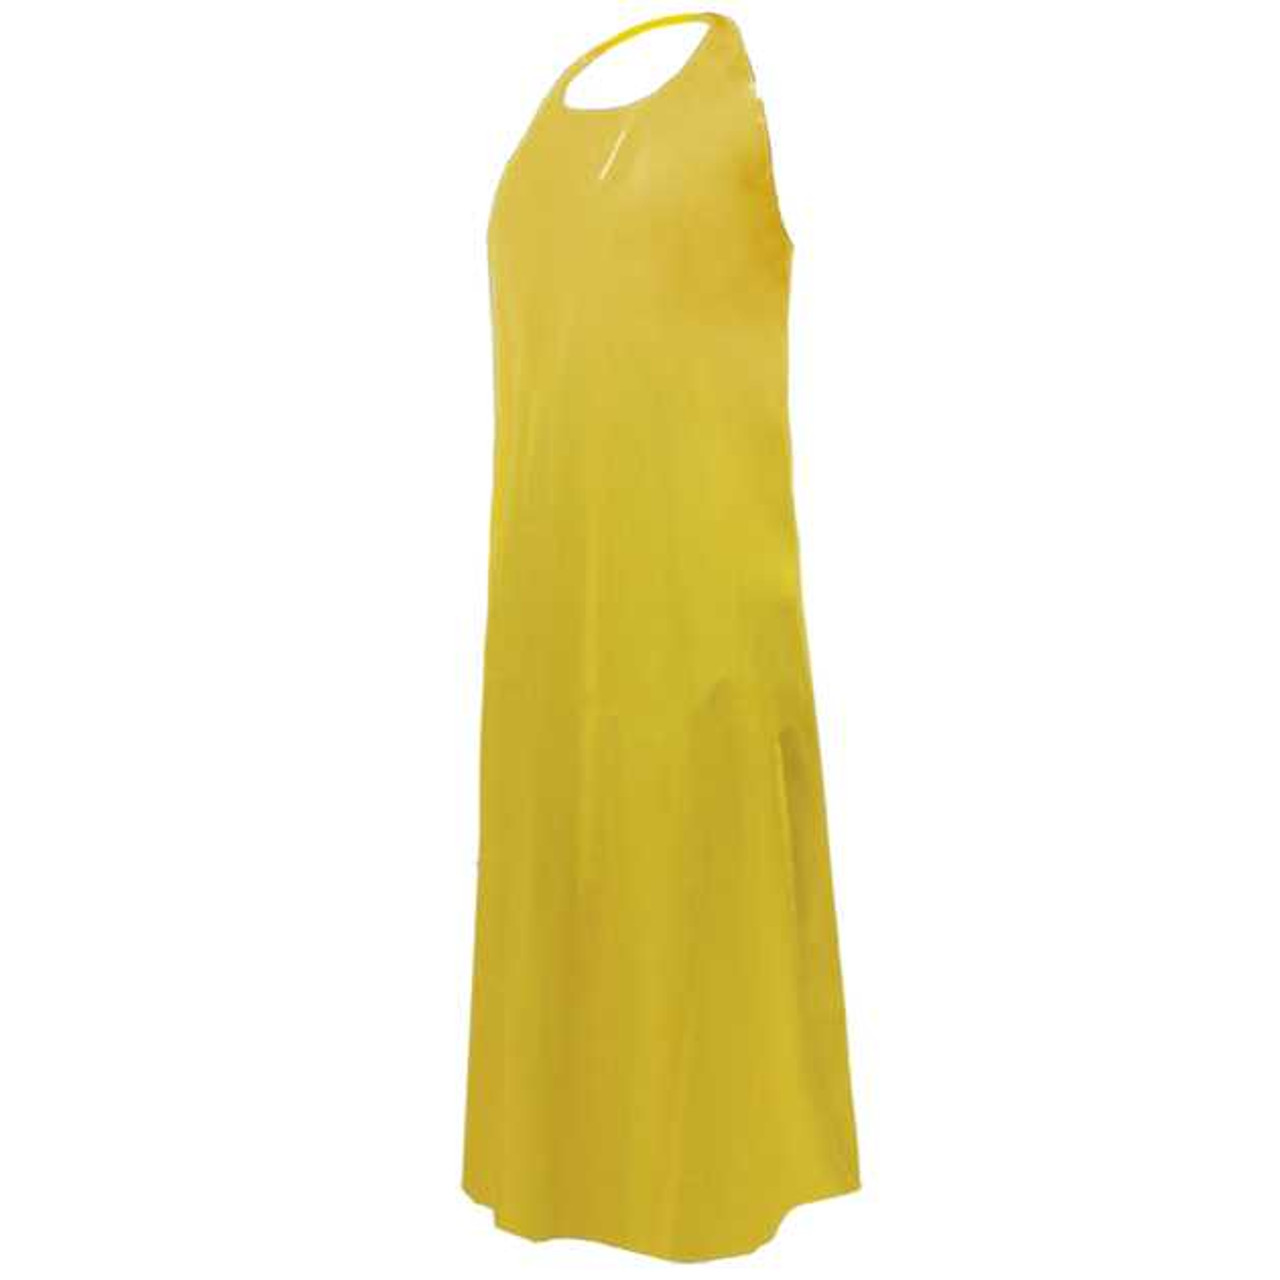 CoverMe™ PEA4, Polyethylene (PE) Apron - 1.5 mil, Available in White, Blue, or Yellow (500 aprons / case)